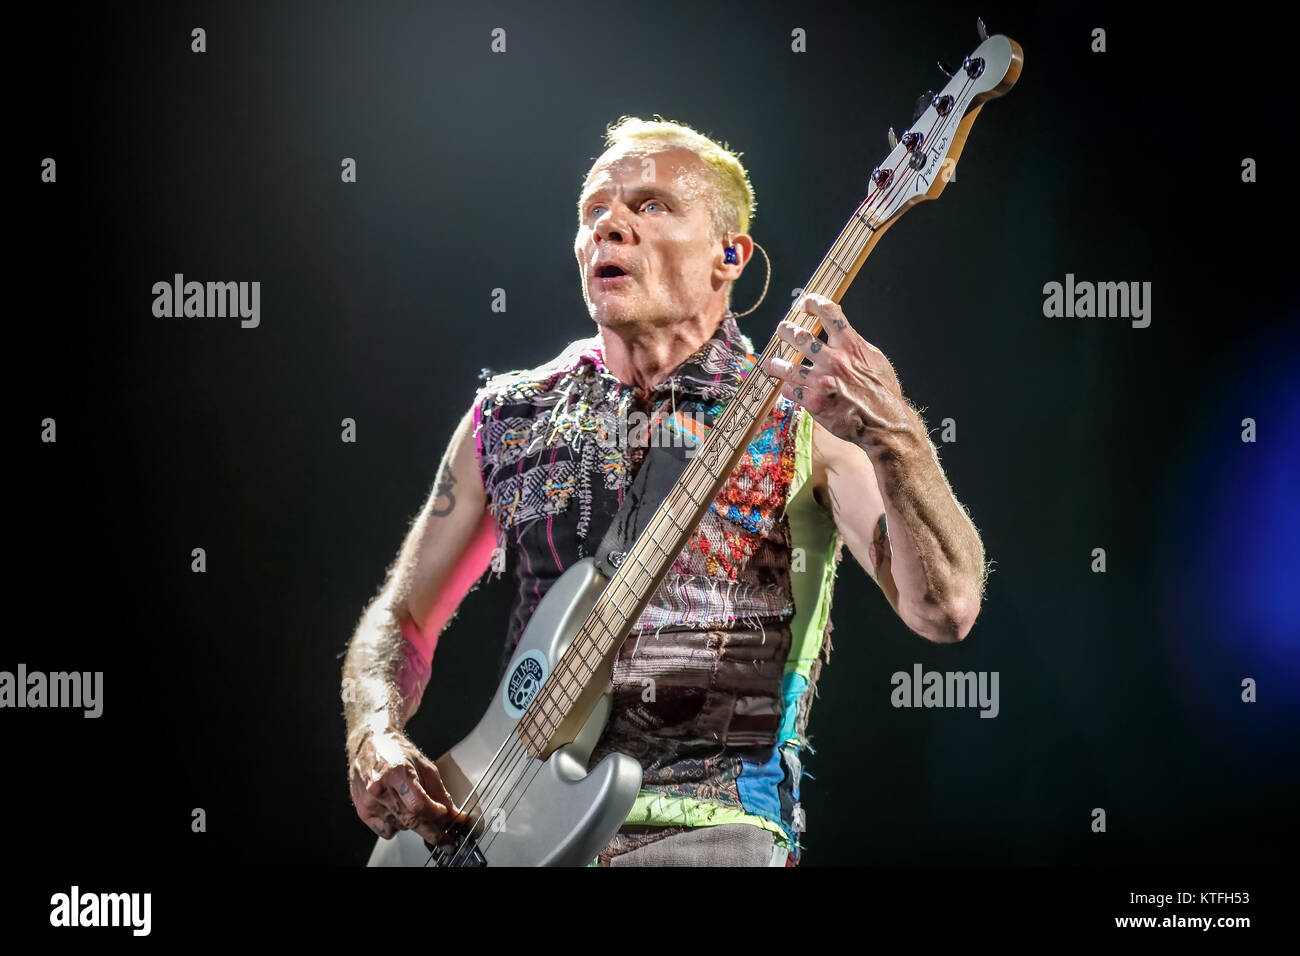 The American rock band Red Hot Chili Peppers performs a live concert at Orange Stage at Telenor Arena in Oslo. Here bass player Flea is seen live on stage. Norway, 08/09 2016. Stock Photo